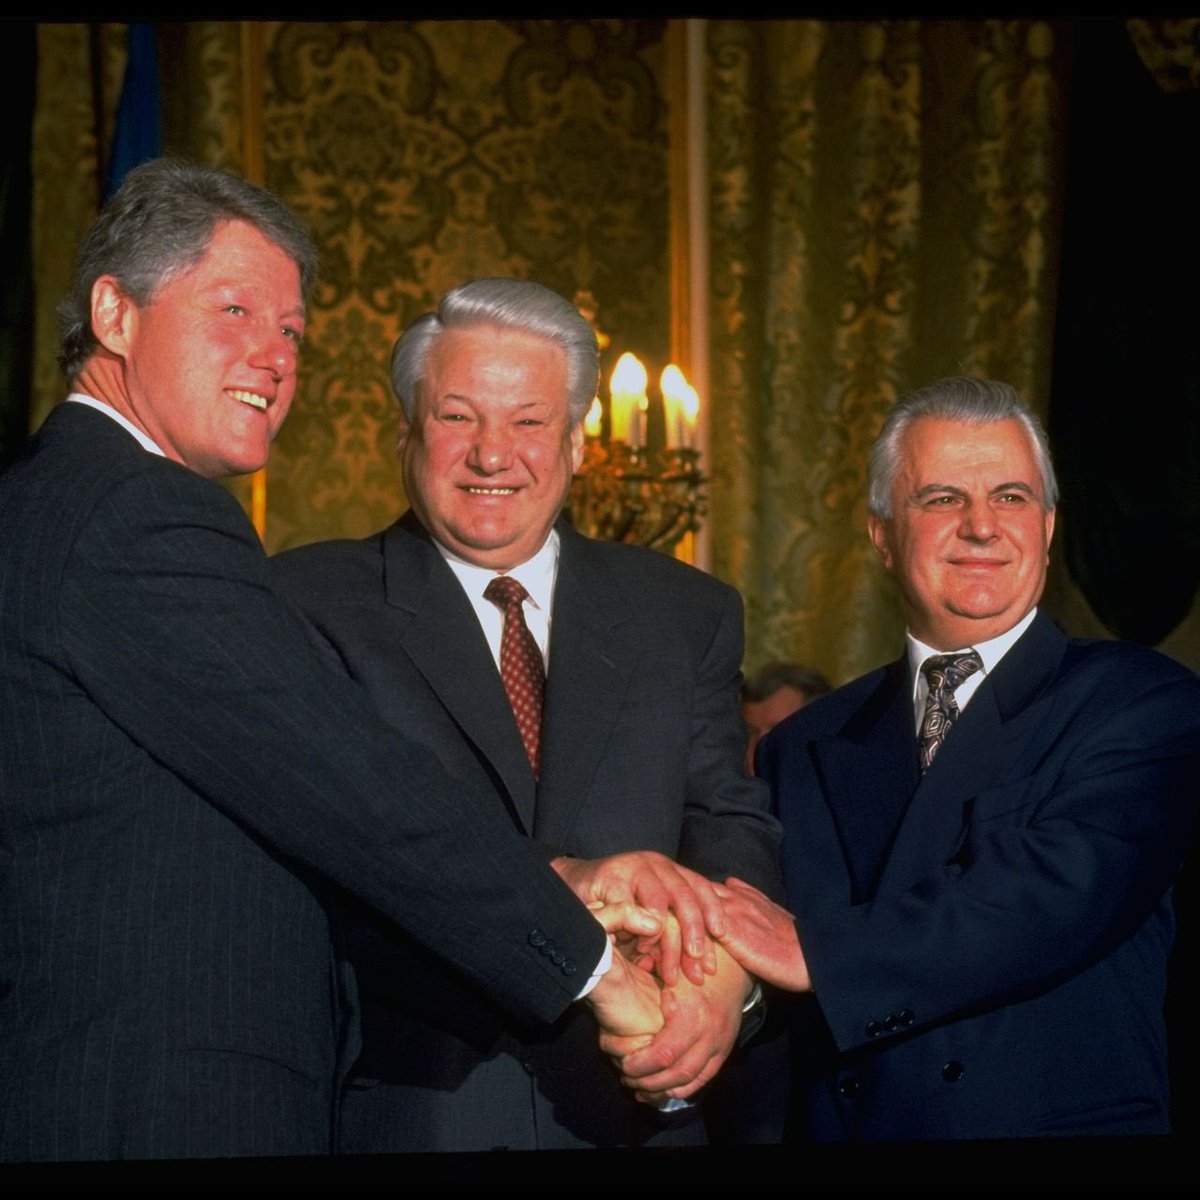 In January 1994, the U.S., Russia and Ukraine issued an historic Trilateral Statement that promised security assurances to Ukraine once the Treaty entered into force and Ukraine became a non-nuclear weapons state and a party to the Nuclear Nonproliferation Treaty.
Thank you 🇺🇸 💪🏾